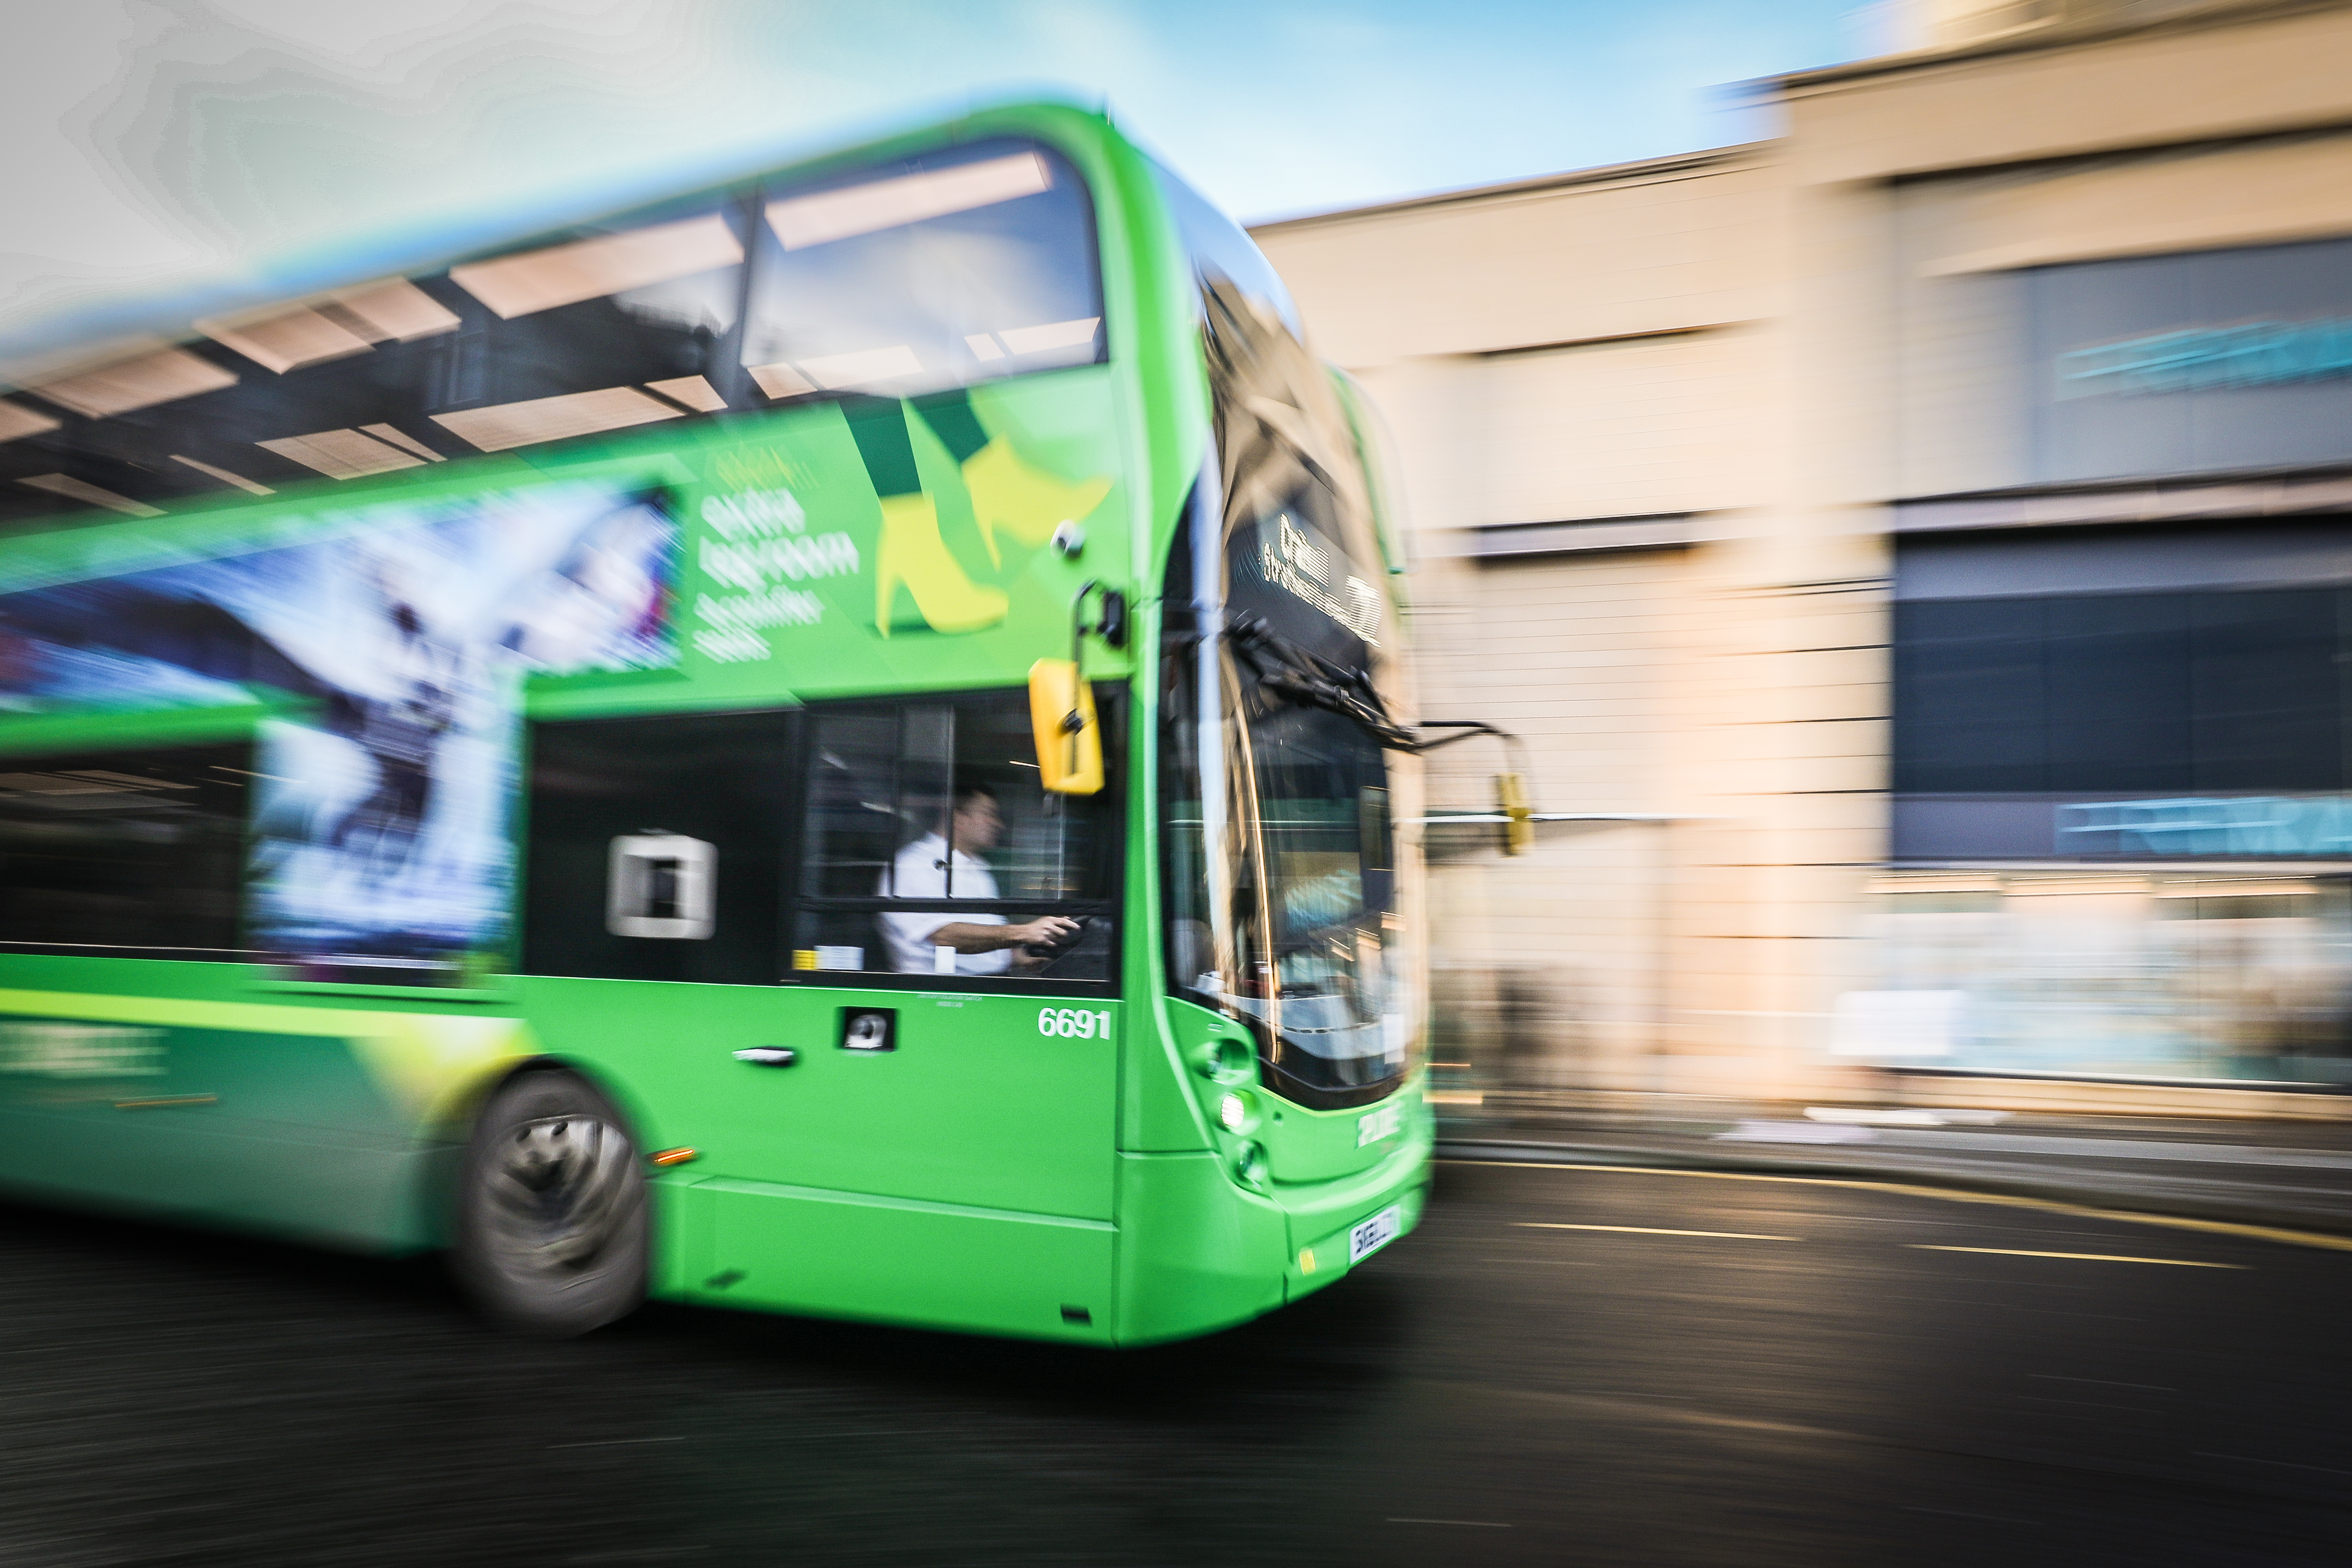 Bus companies say they have invested in vehicles that are more environmentally friendly.